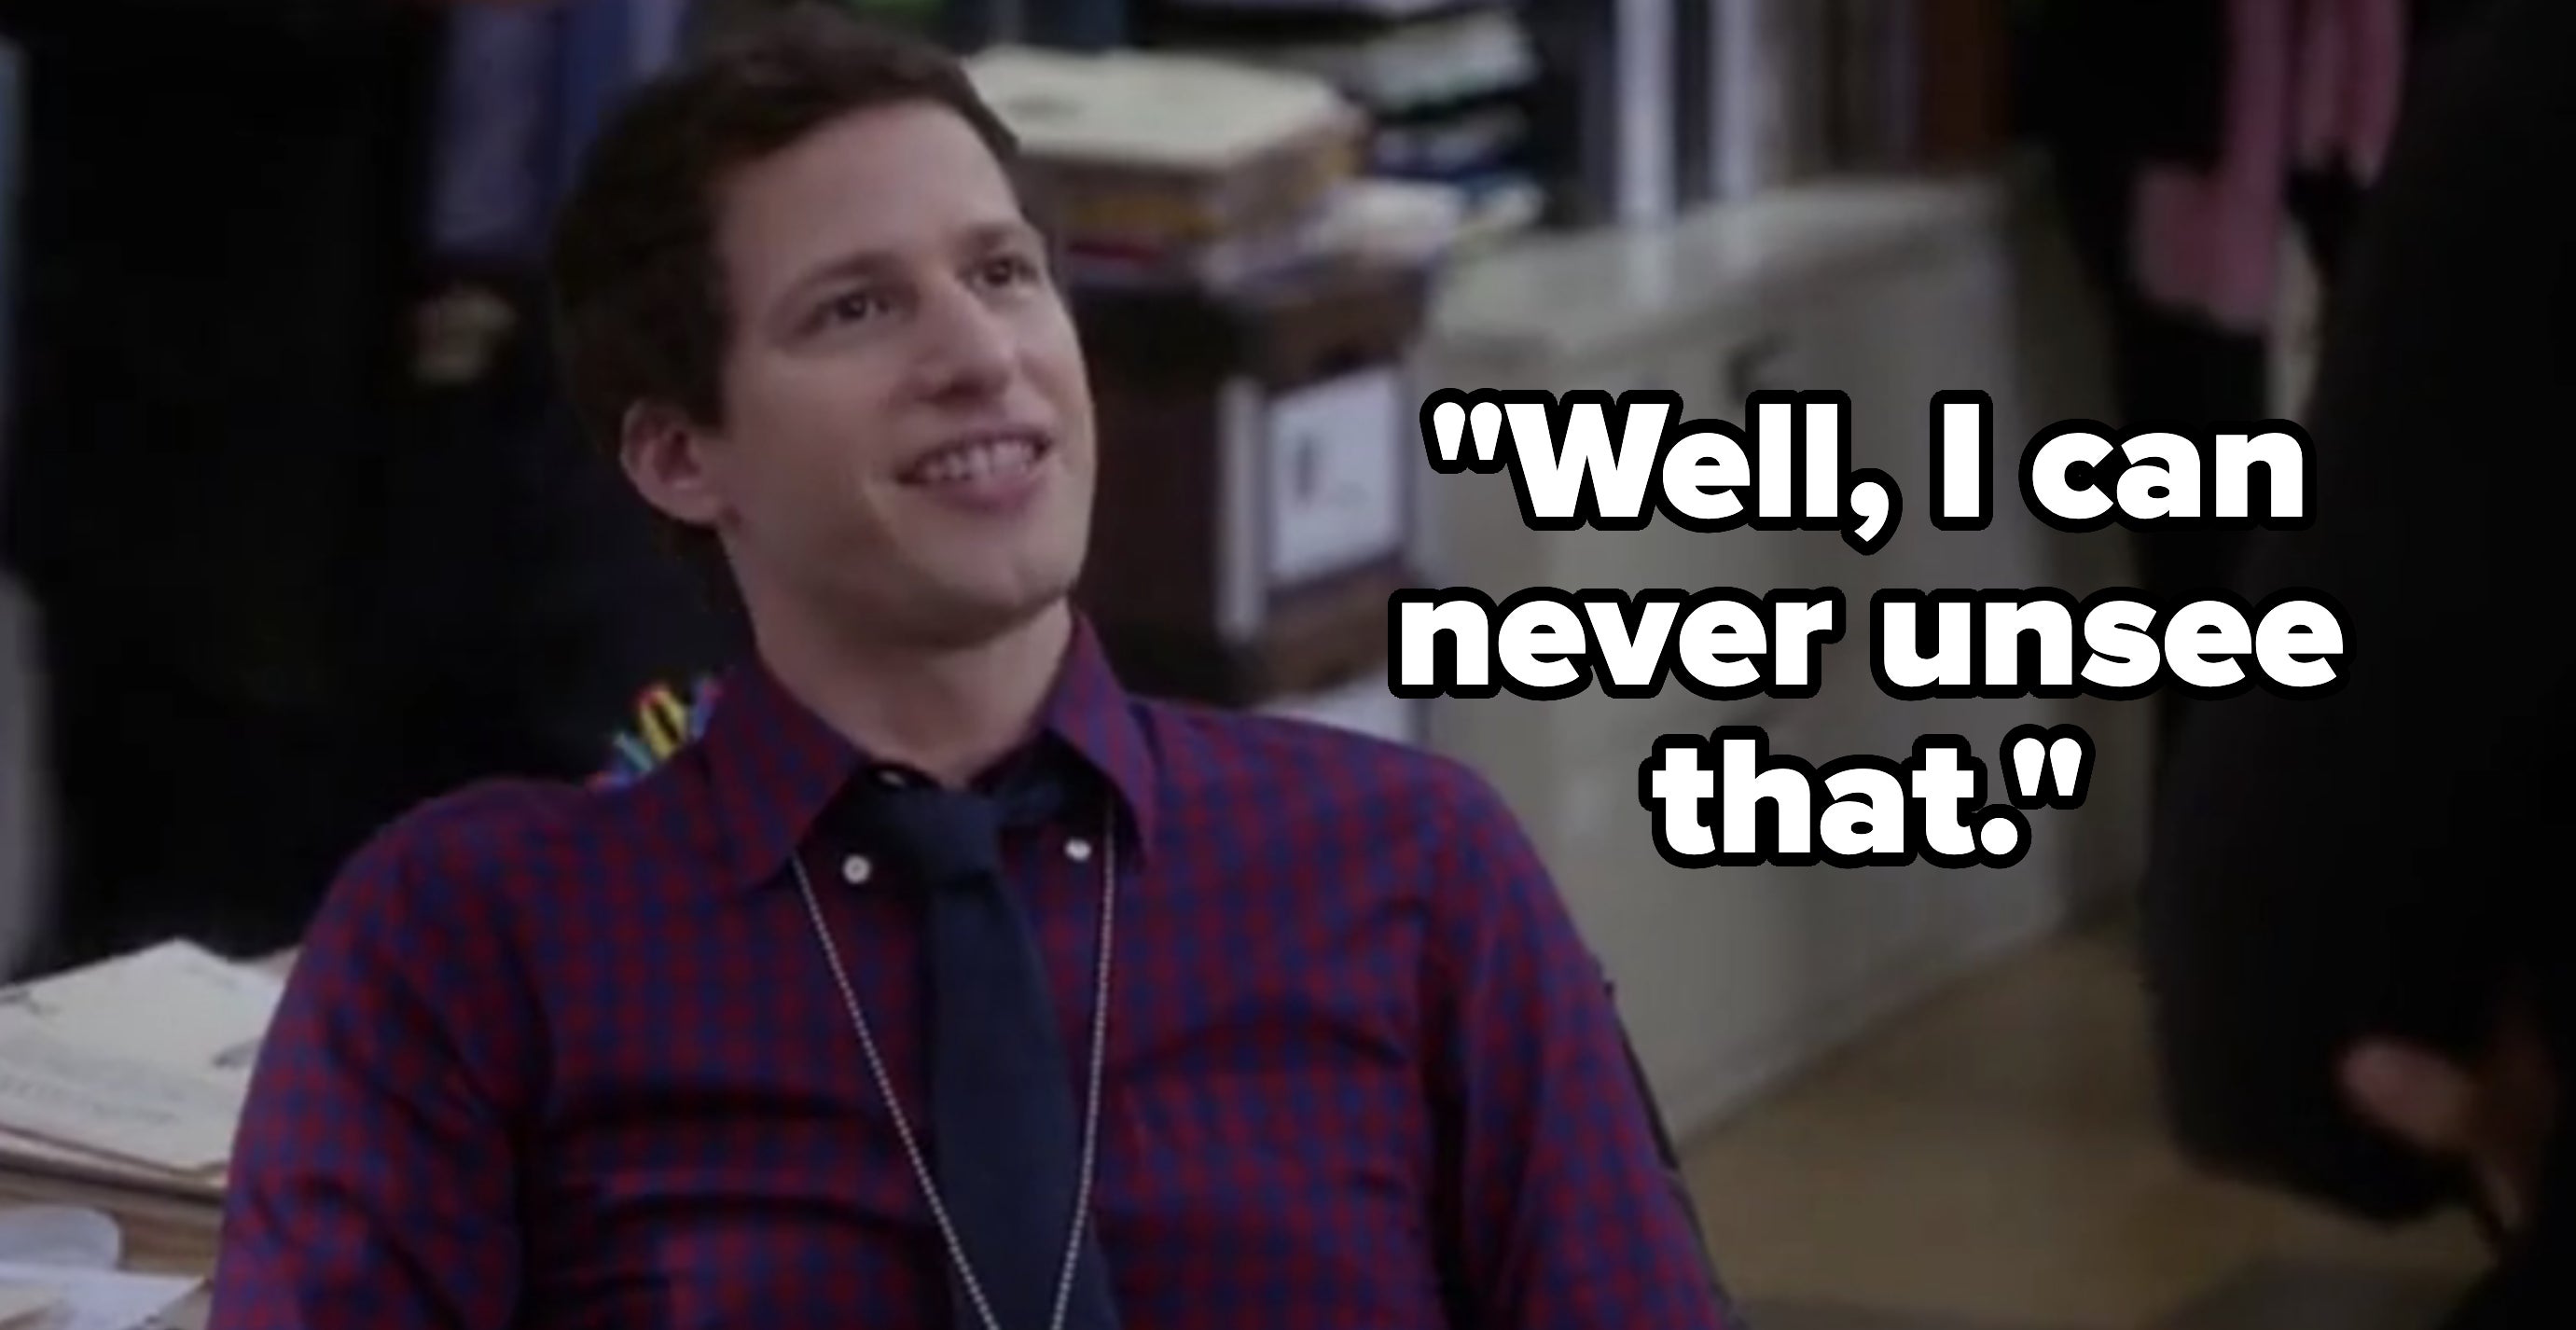 Jake Peralta from Brooklyn Nine-Nine wearing a plaid shirt and badge, smiling, seated indoors